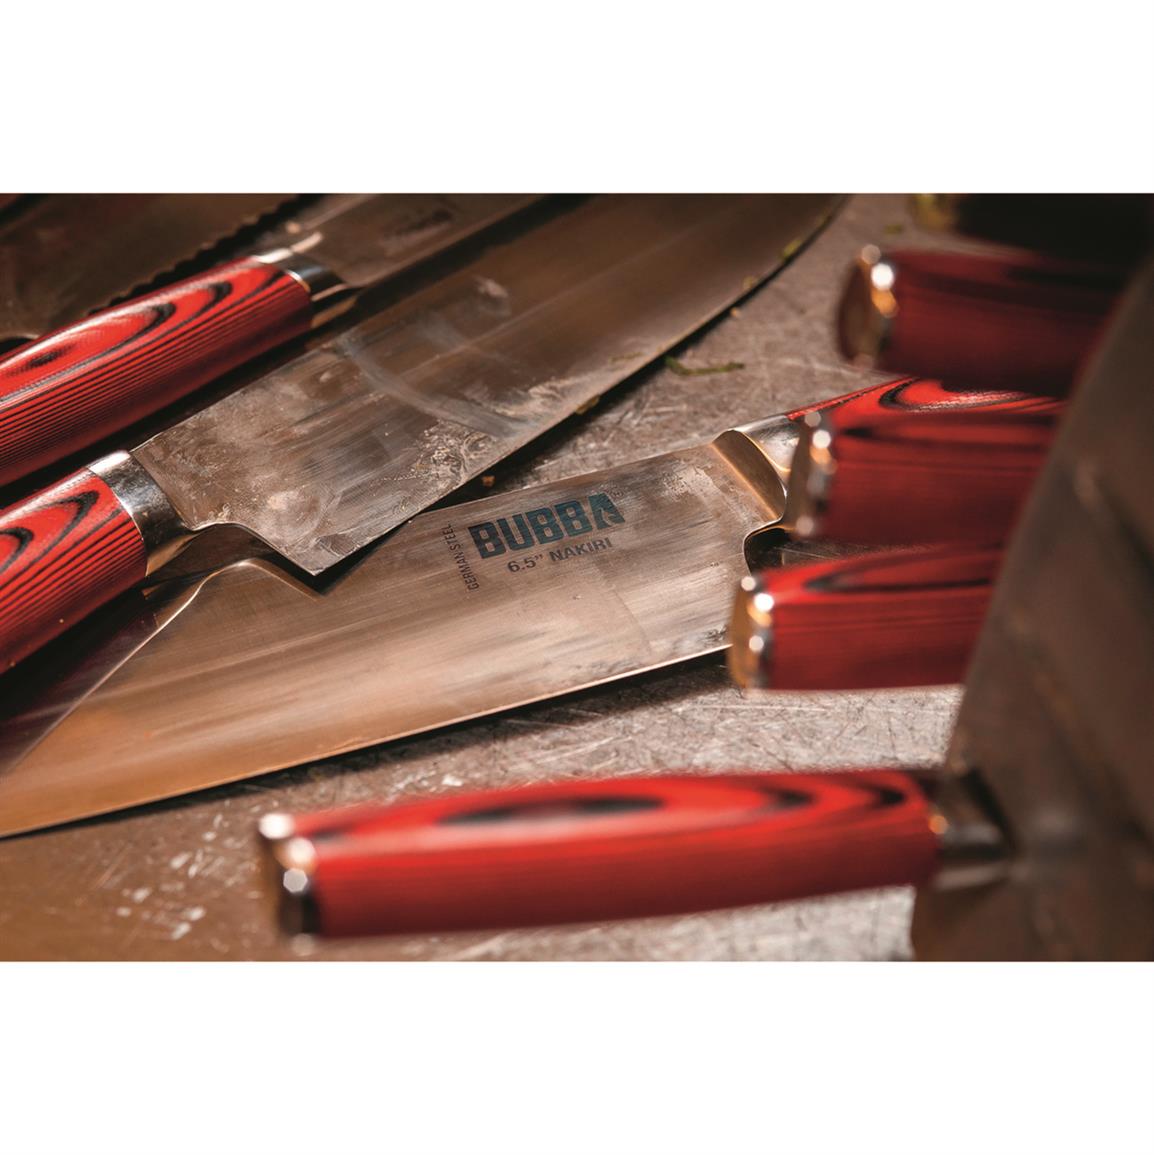 Zwilling J.A. Henckels Steak Knife Set with Gift Box, 8 Piece - 713406,  Kitchen Knives at Sportsman's Guide